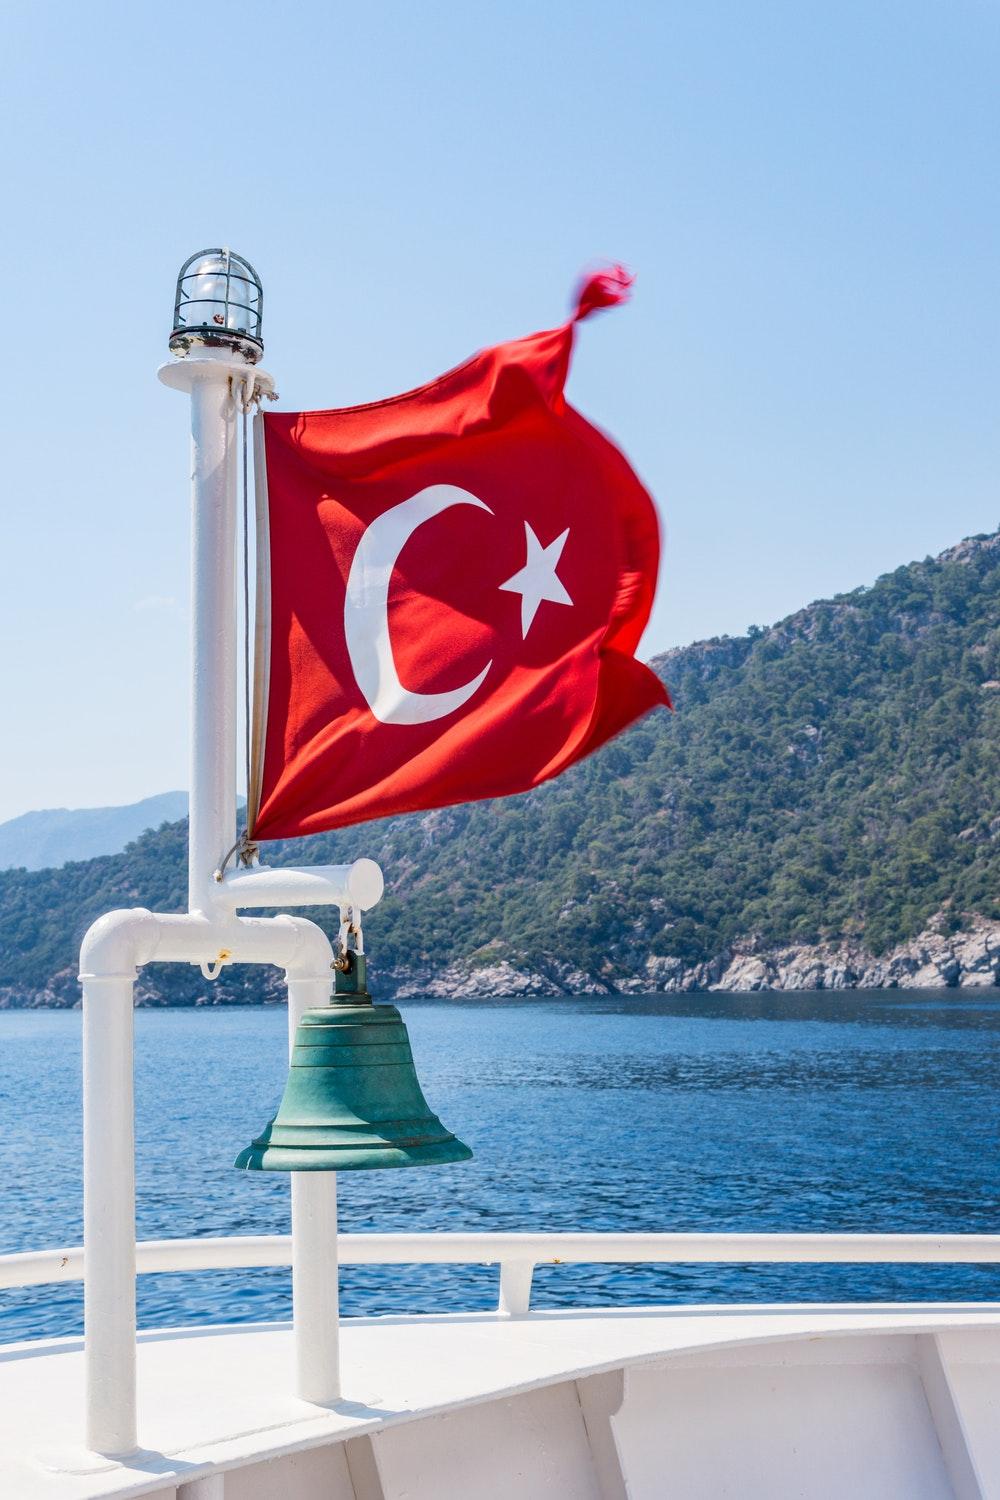 Turkish Flag Picture. Download Free Image